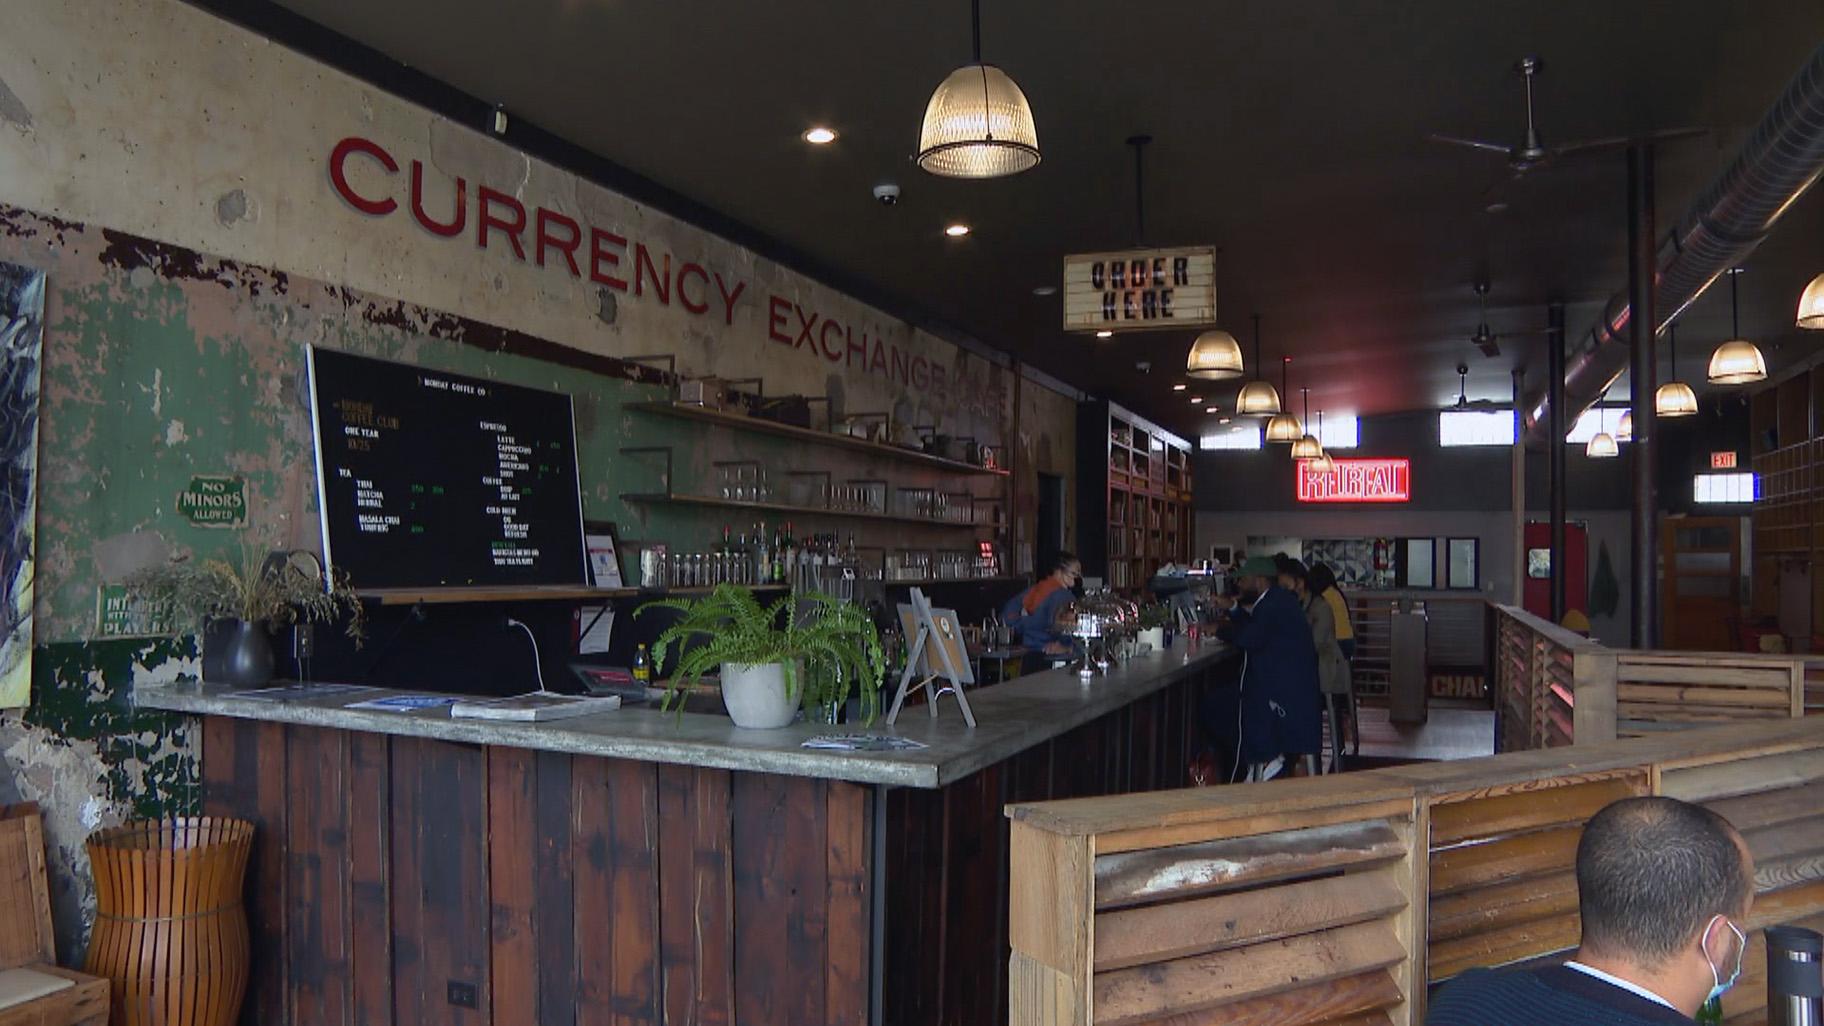 One local spot that has opened back up — the Currency Exchange cafe, developed by artist Theaster Gates’ foundation. (WTTW News)